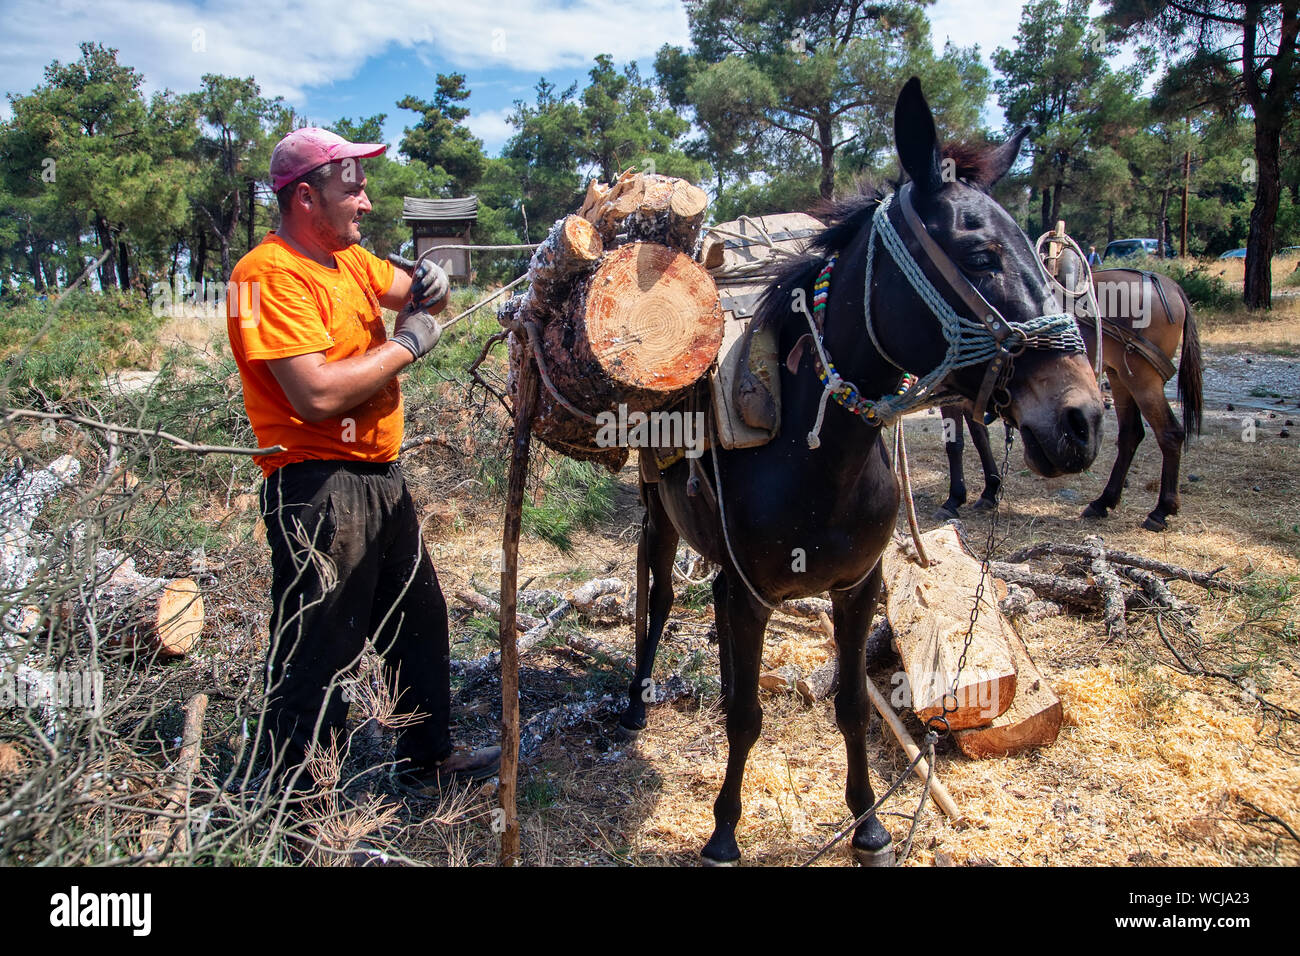 Lumber Industry Horses High Resolution Stock Photography and Images - Alamy